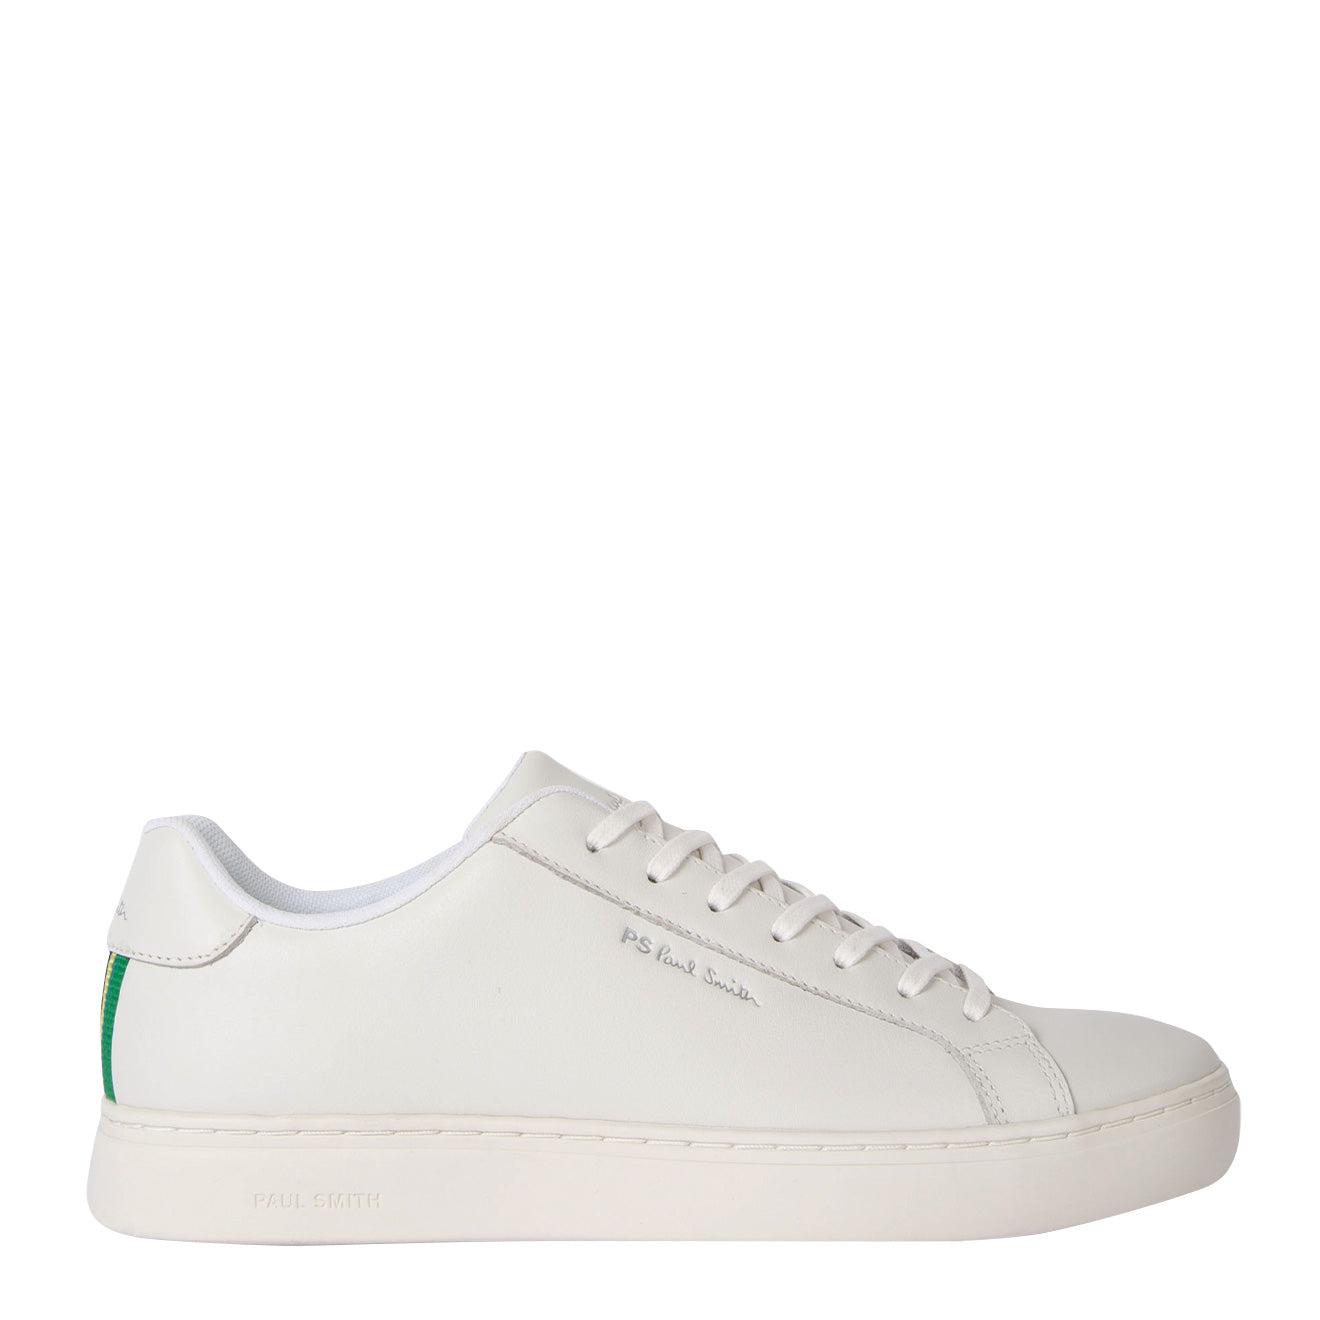 Paul Smith Leather Rex Trainers in White for Men - Save 35% | Lyst